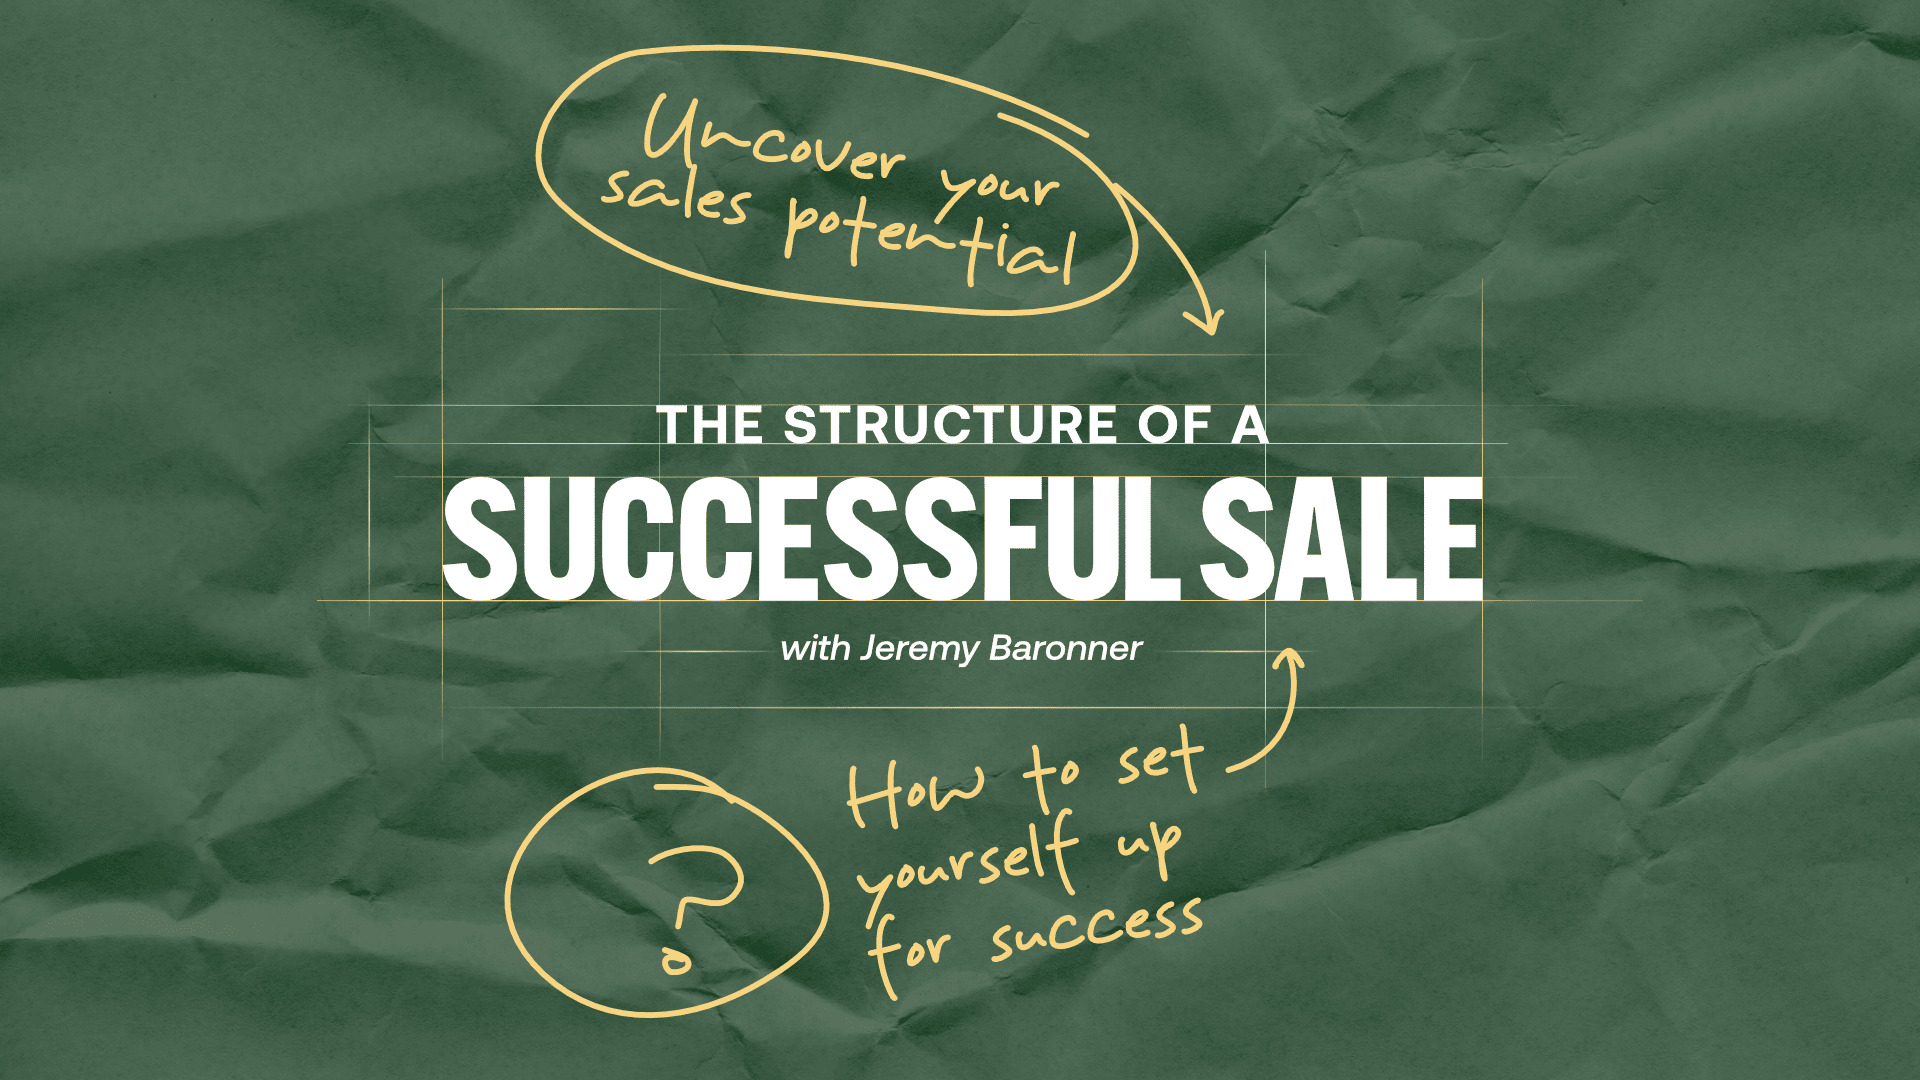 Course_The_Structure_of_a_Successful_Sale_Course_The_Structure_of_a_Successful_Sale_-_With_Safe_Zone_2x_4_eb1akg